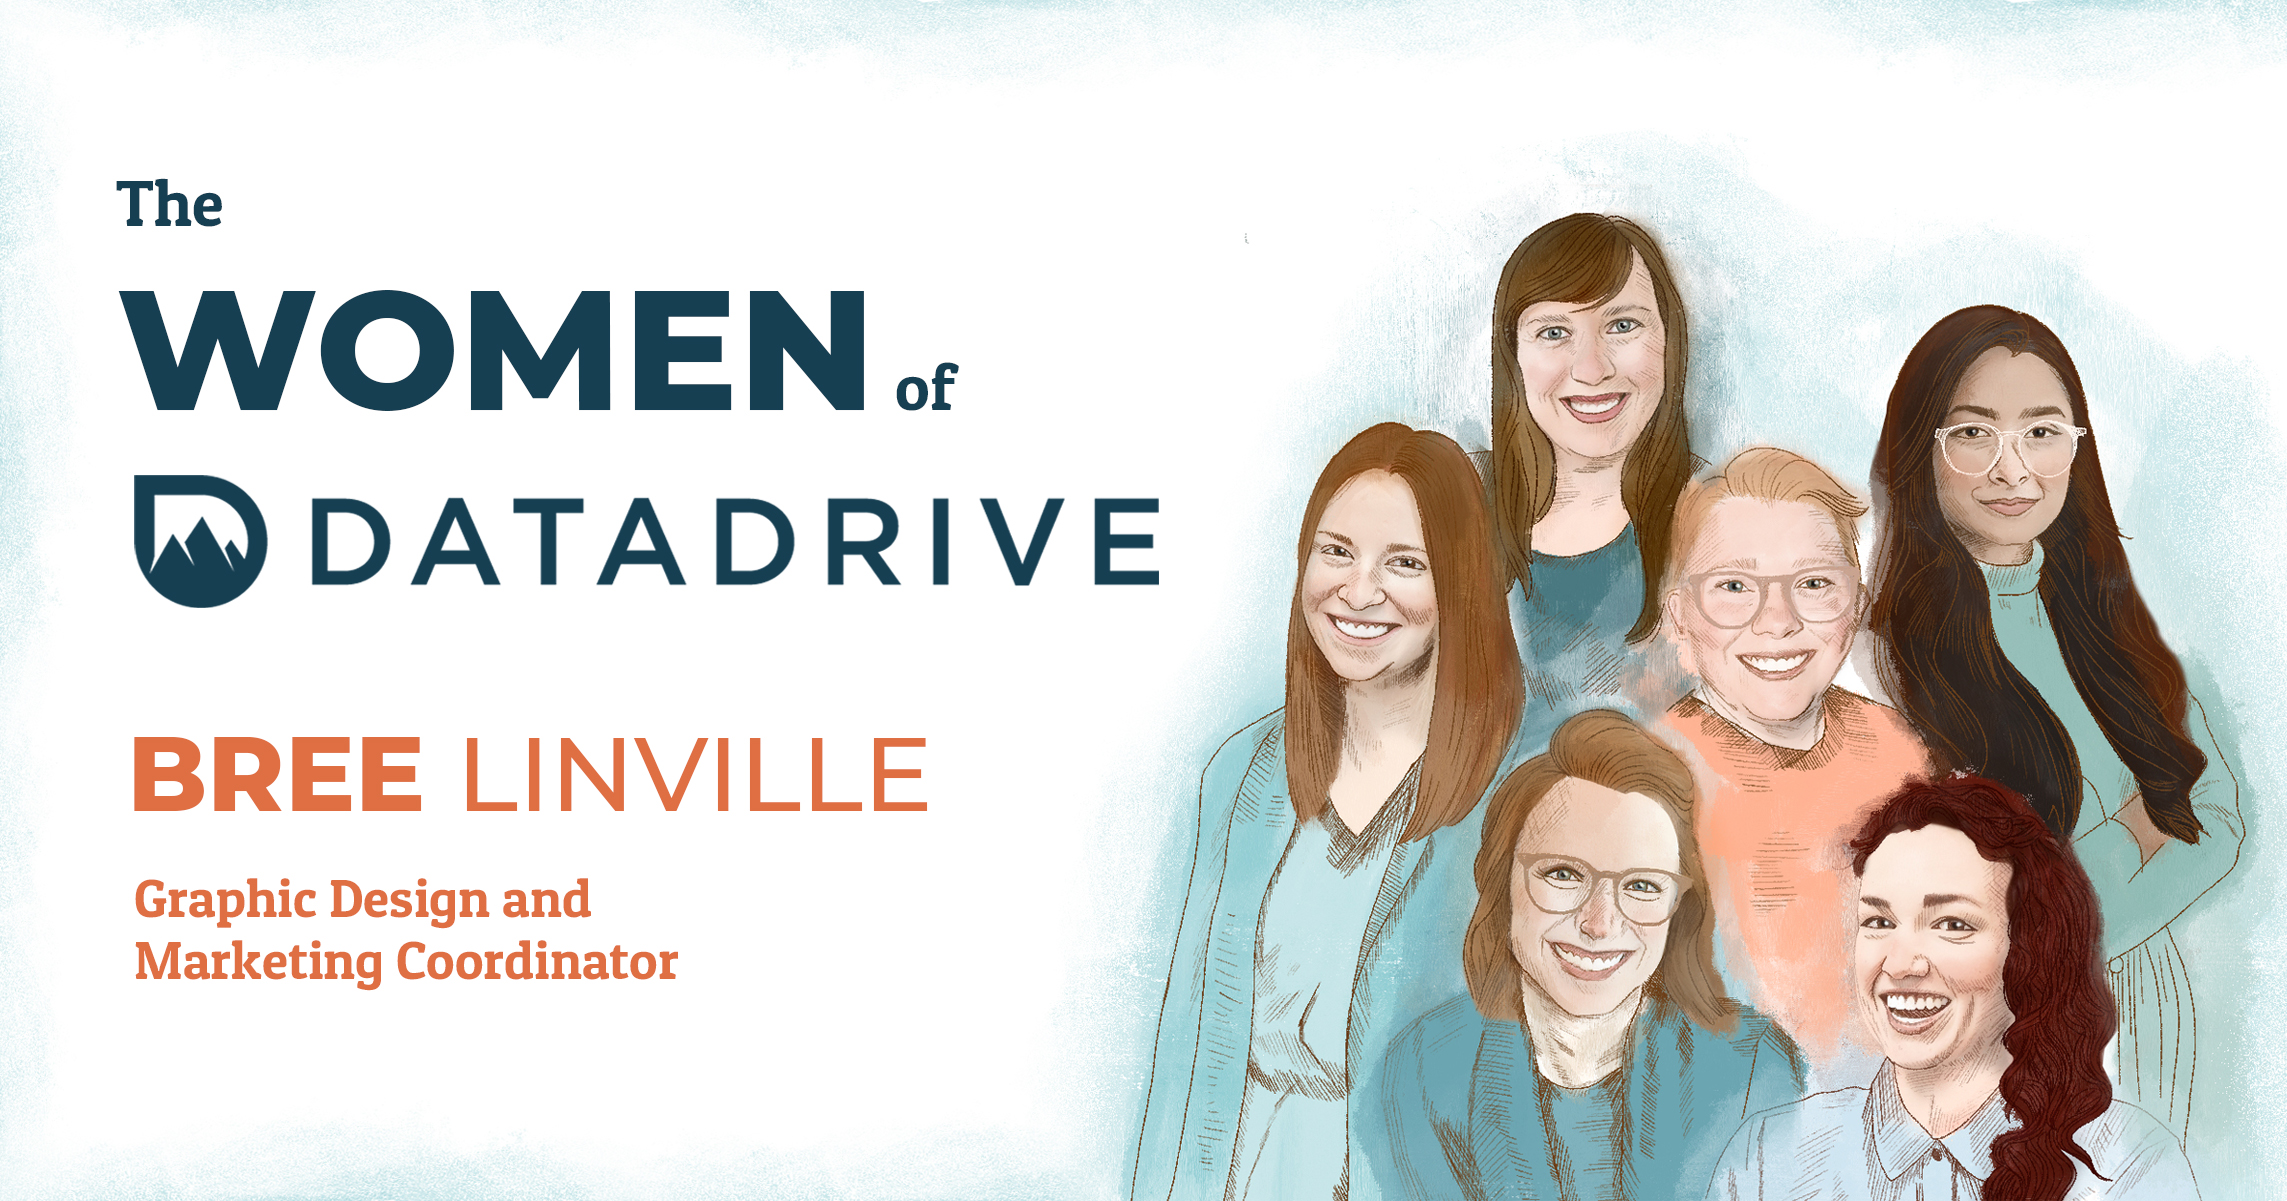 The Women of Data Drive Bree Linville